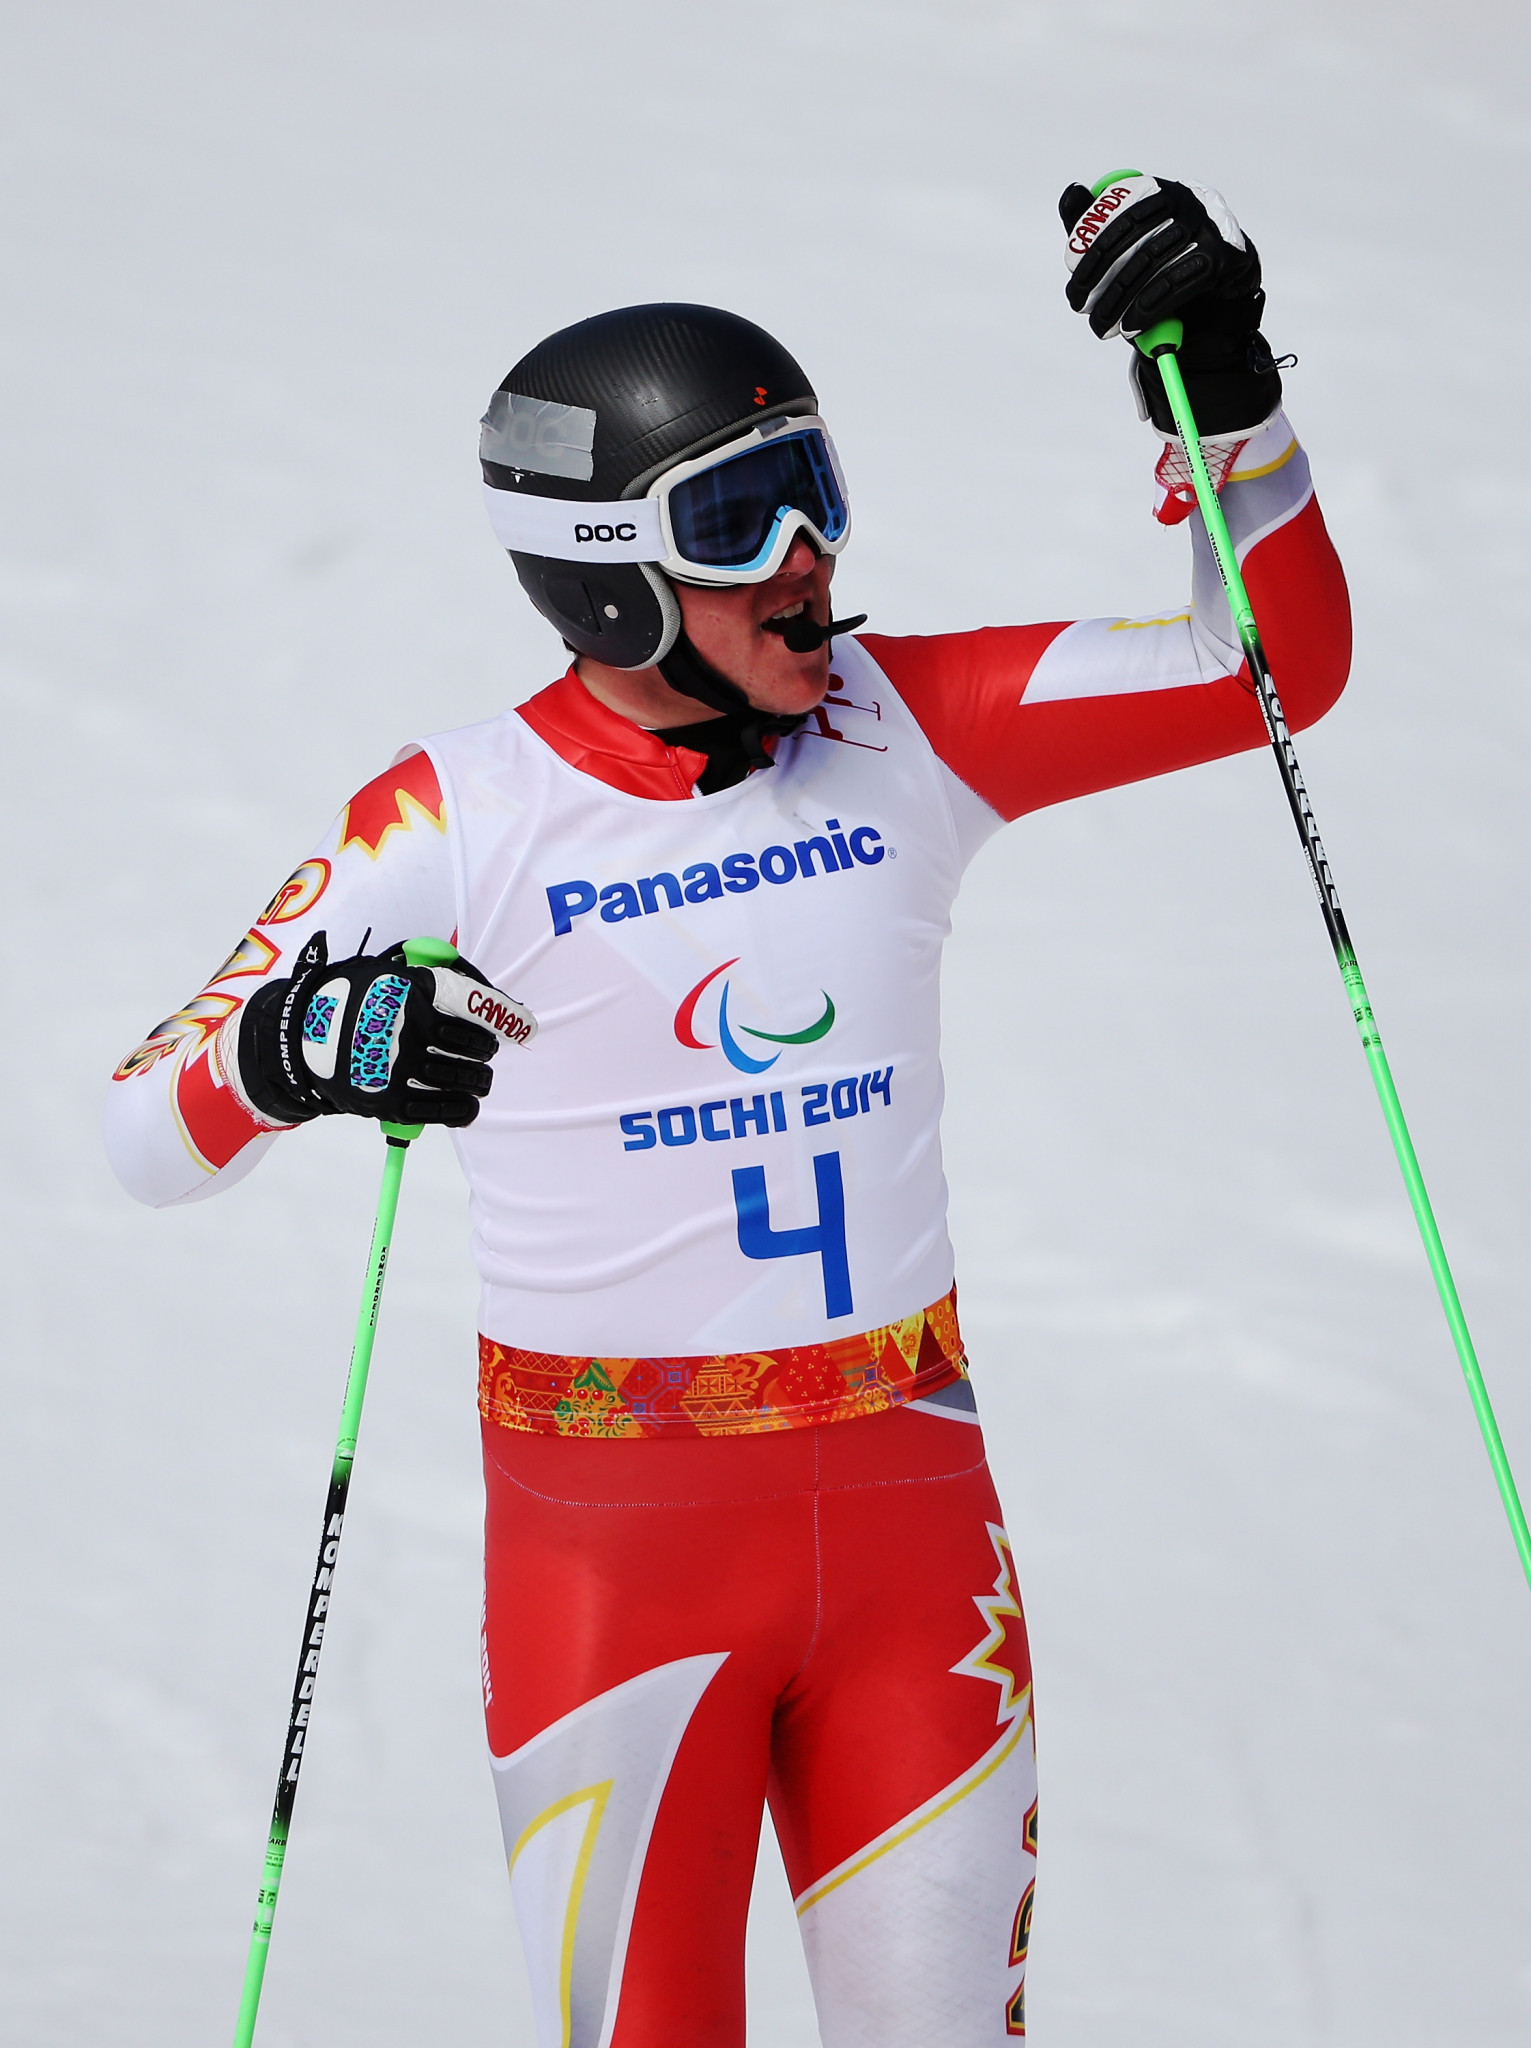 Mac Marcoux won one gold medal and two bronze at Sochi 2014 ©Getty Images